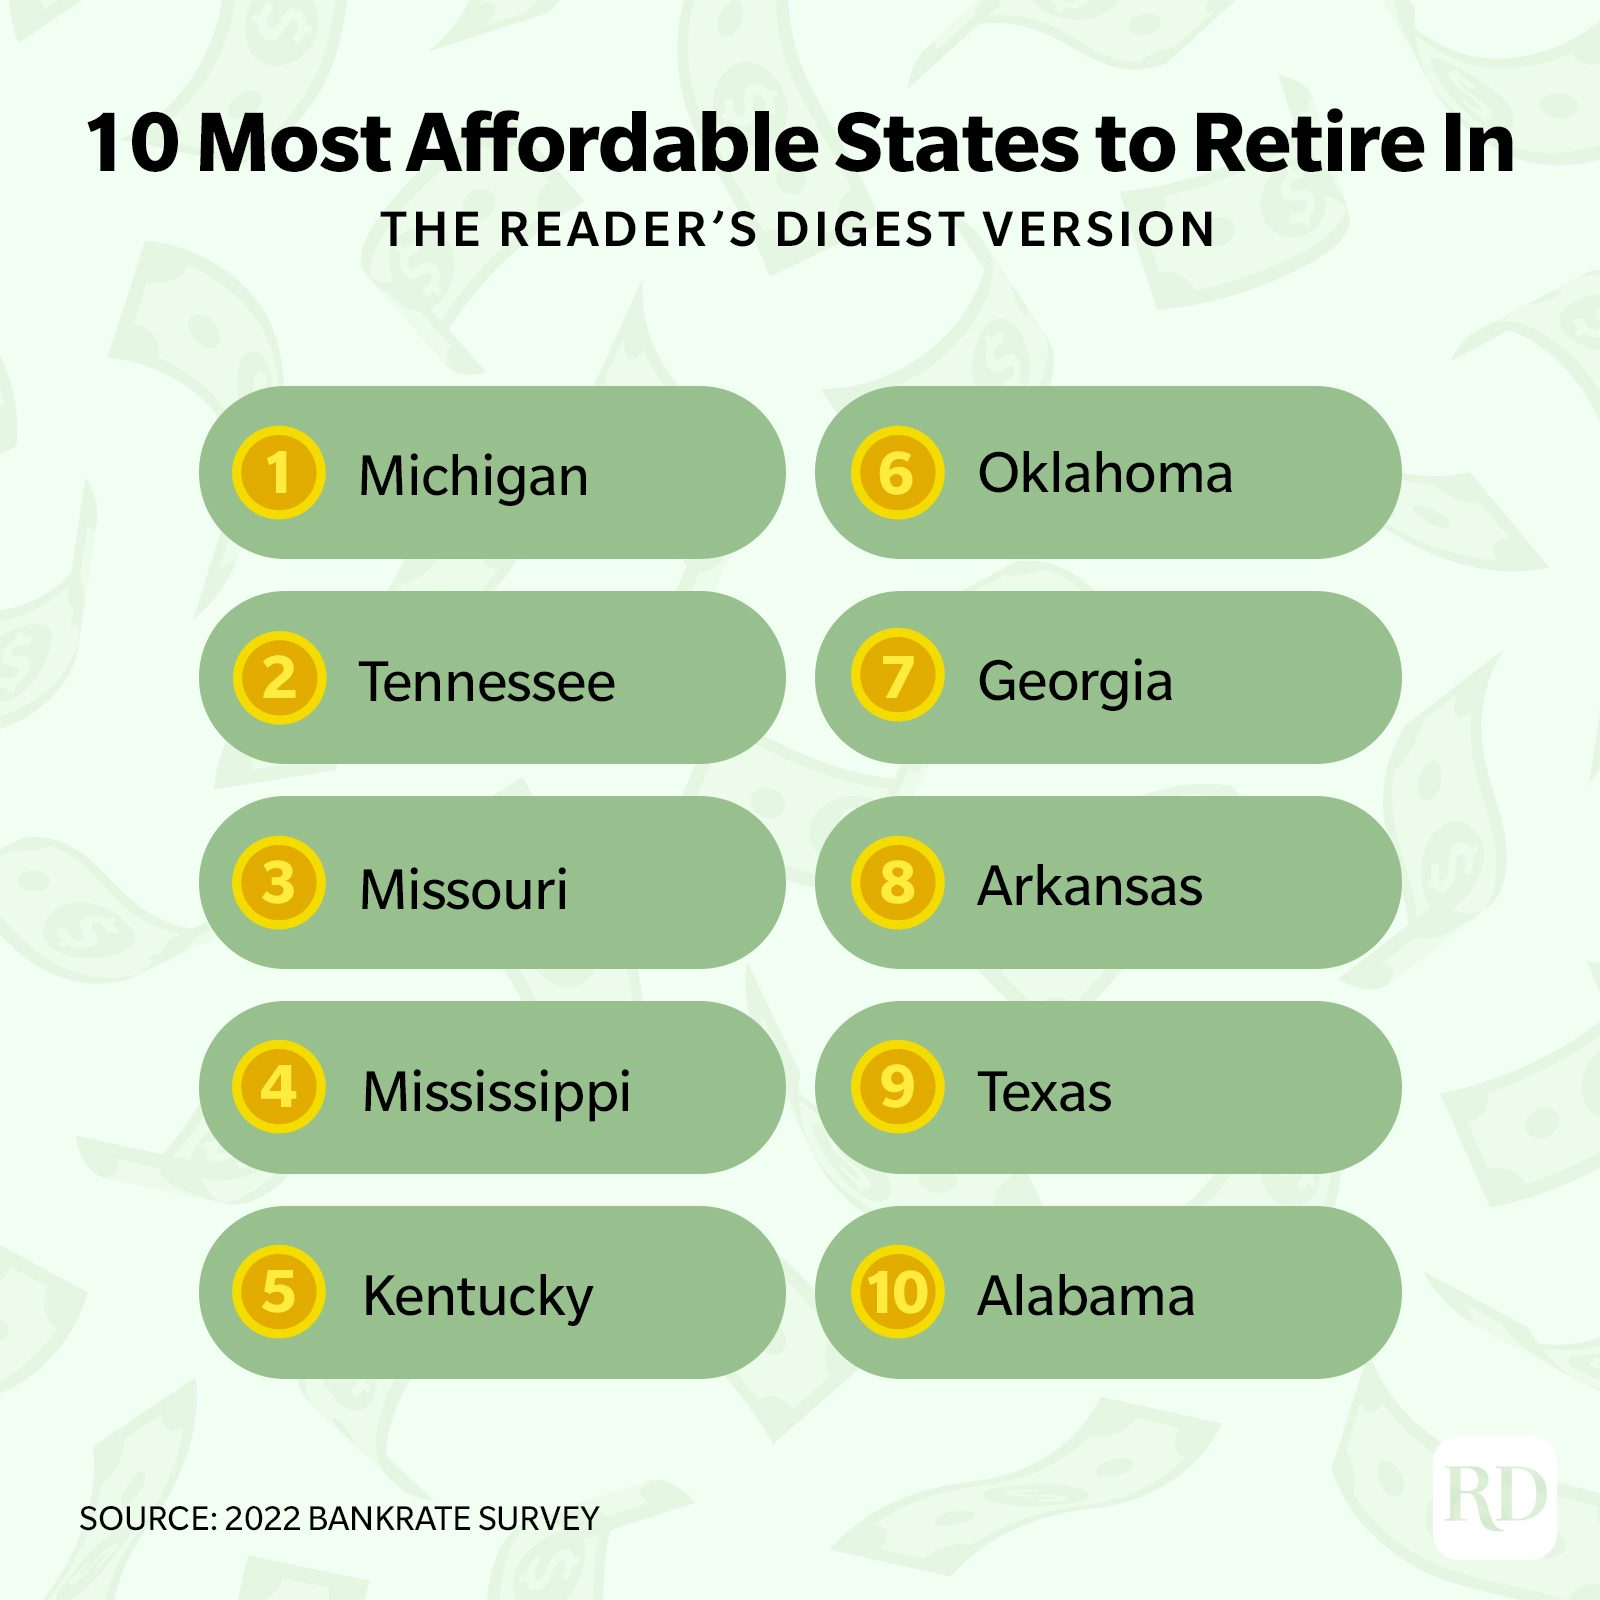 Top 10 best states to retire based on quality of life